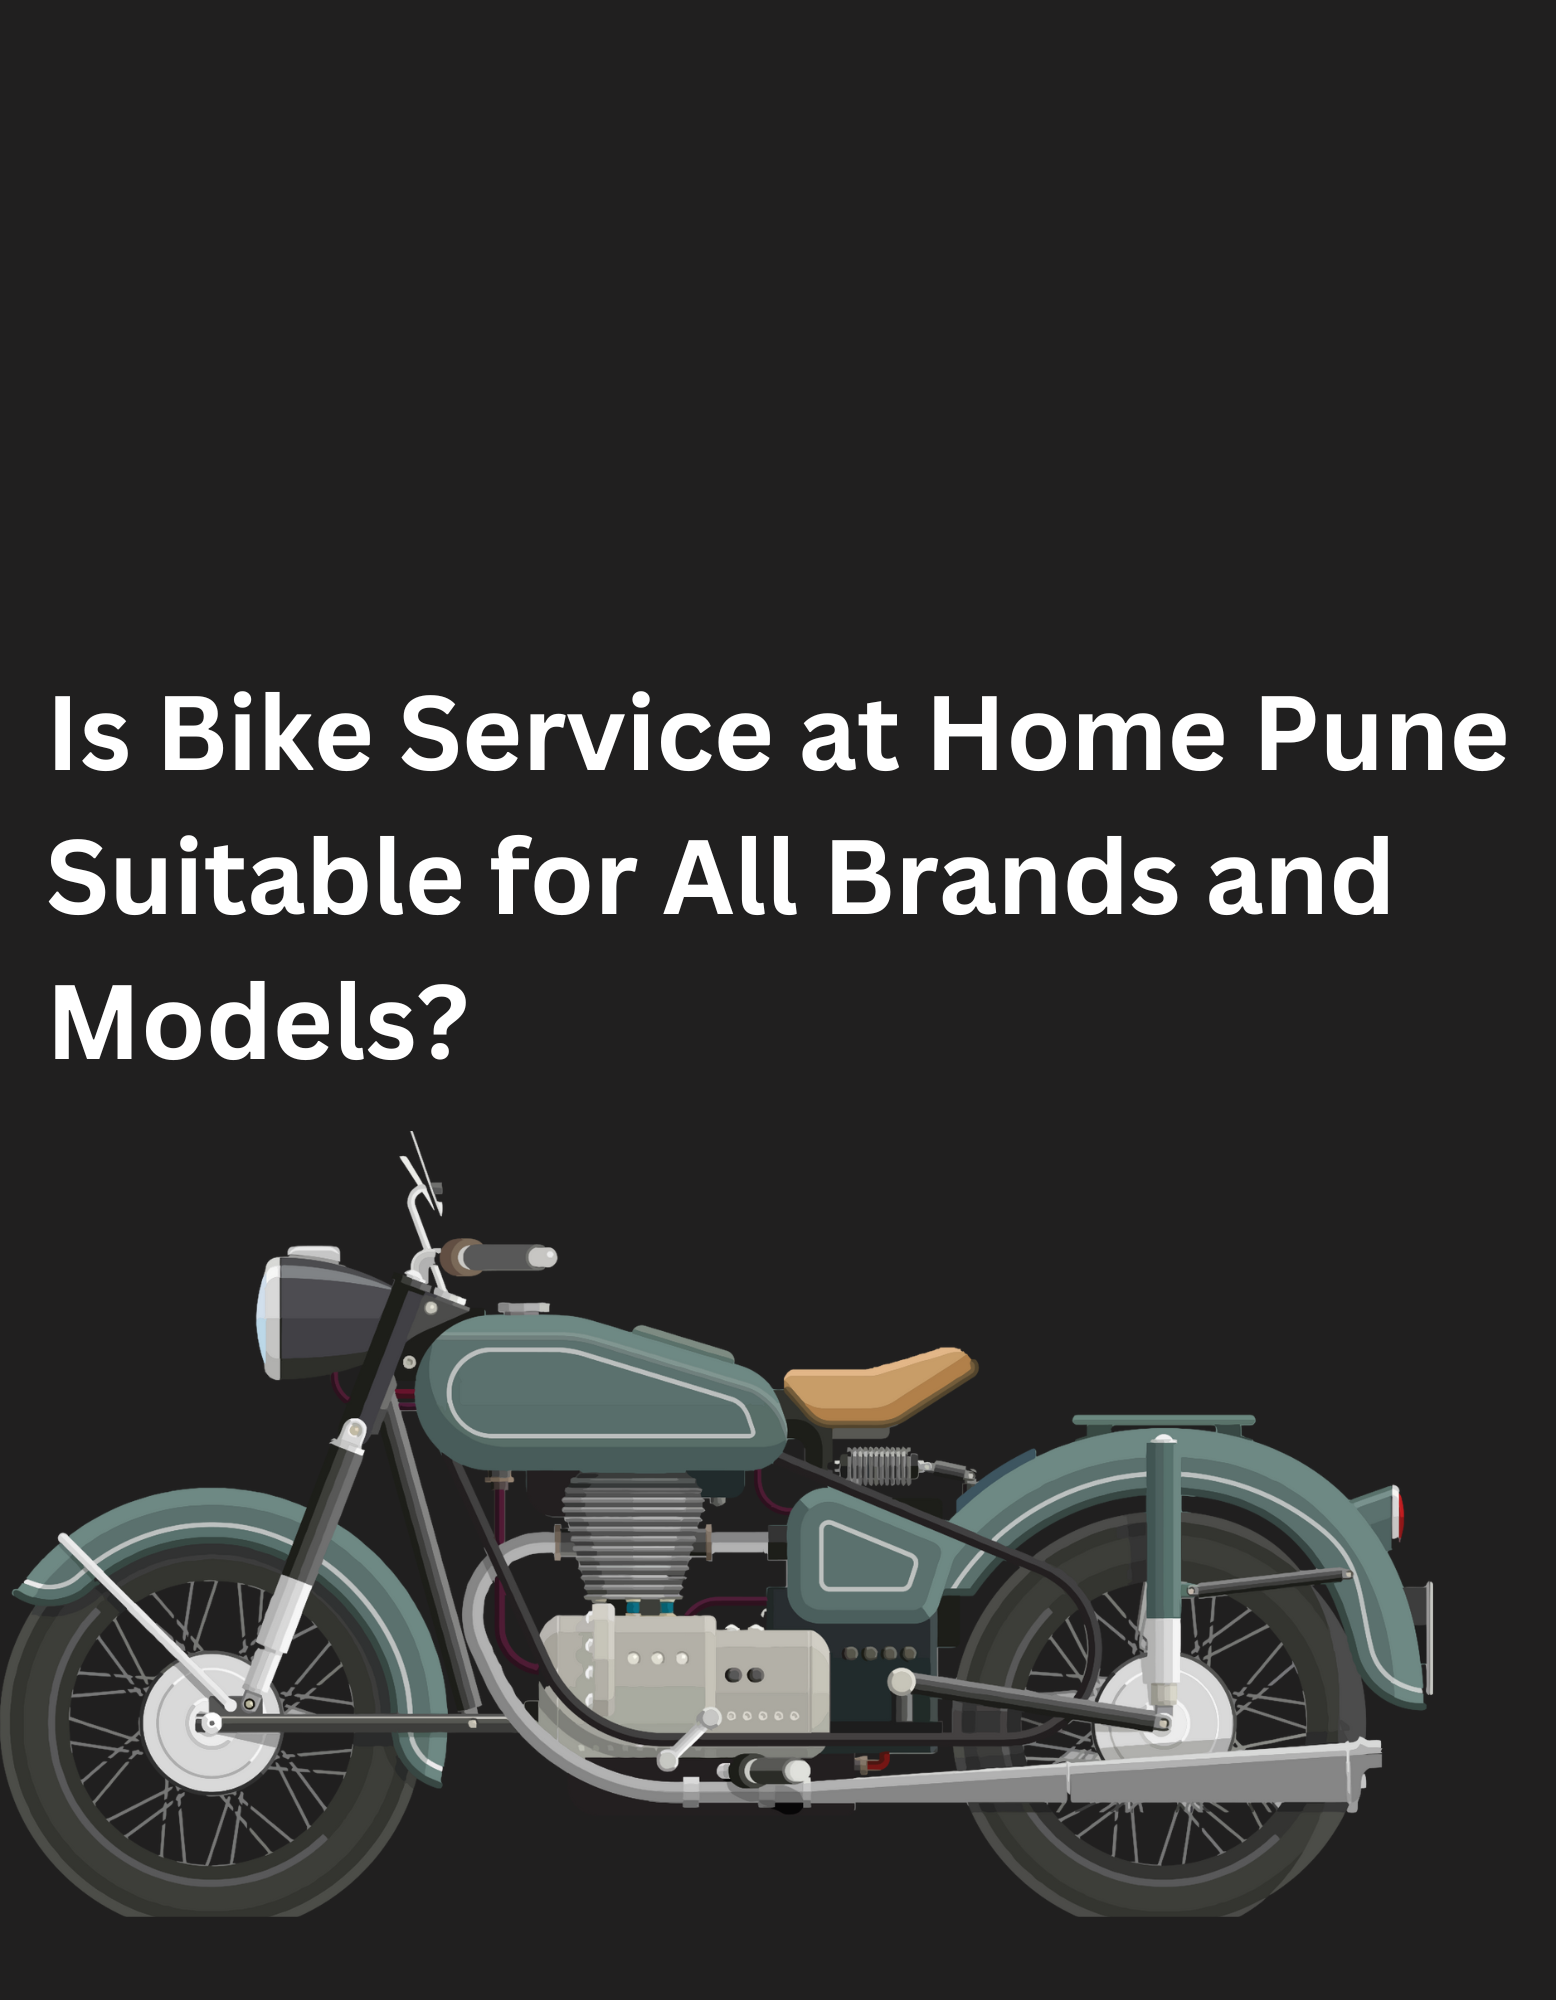 Is Bike Service at Home Pune Suitable for All Brands and Models